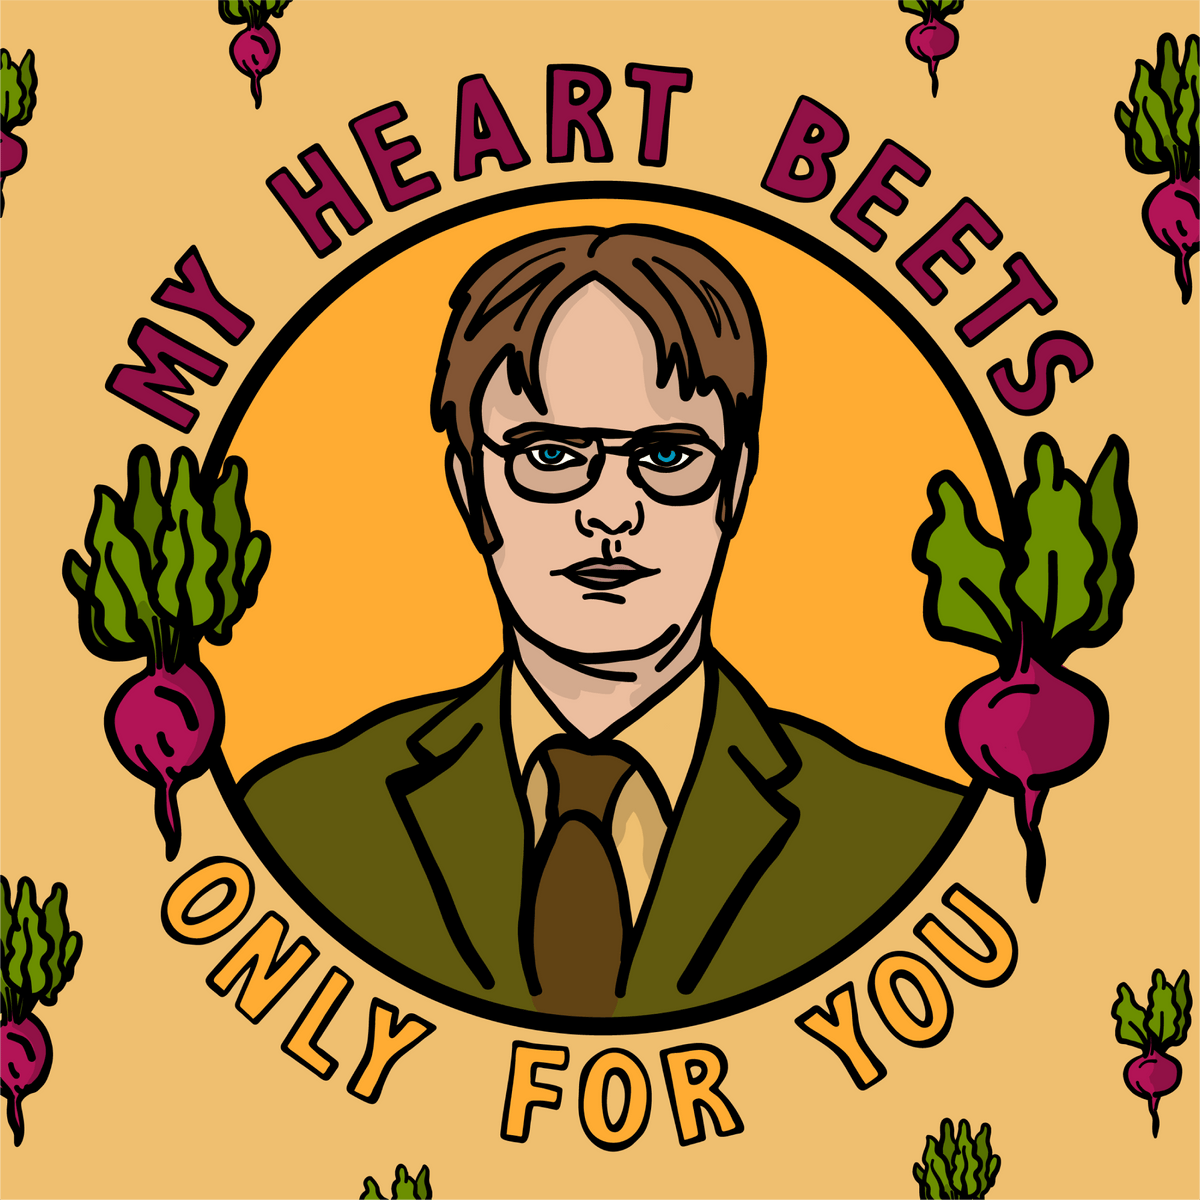 My Heart Beets For You 💓🖱️ - Mouse Pad